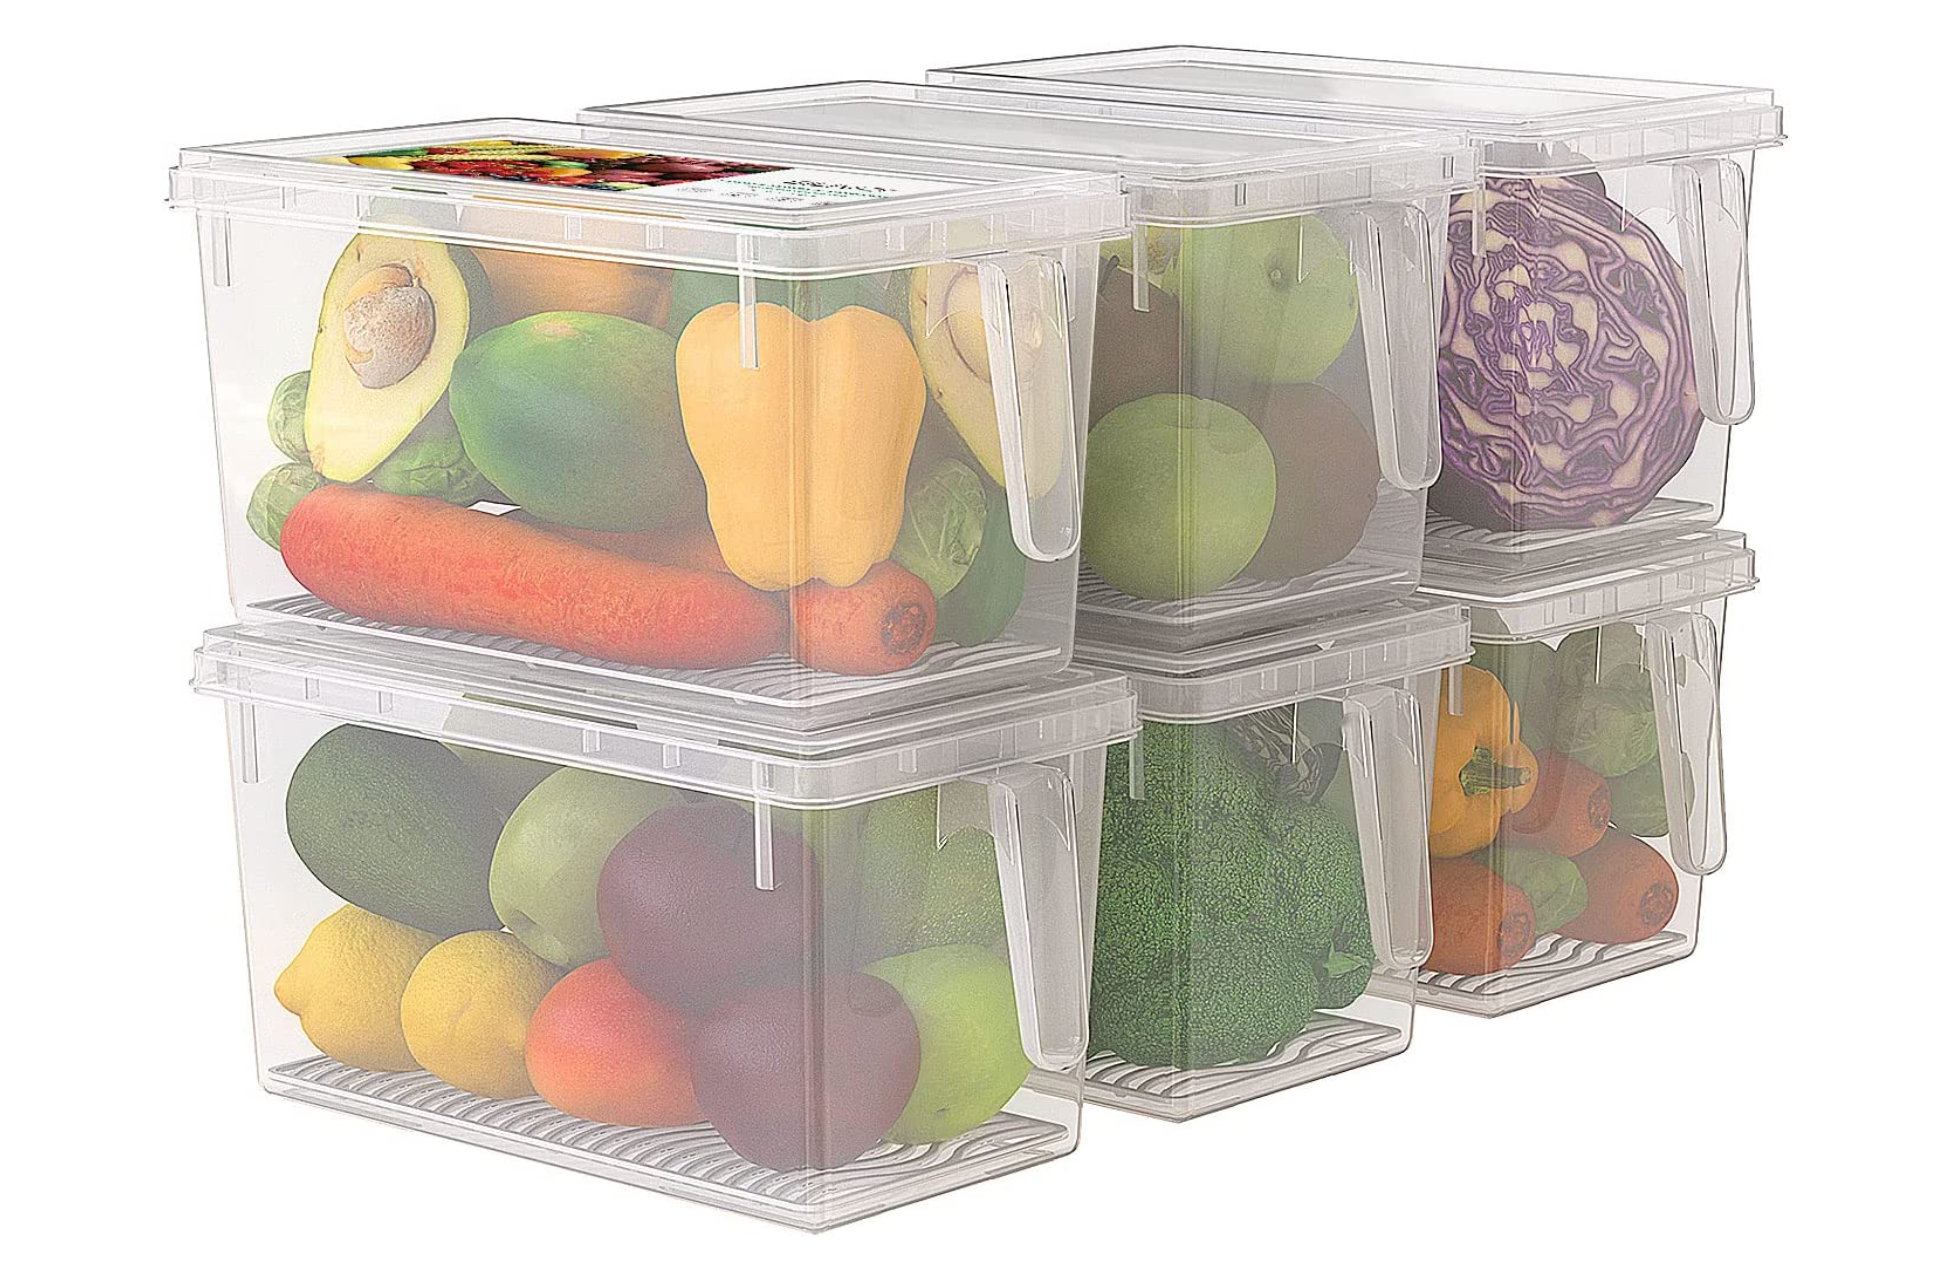  SILIVO Produce Saver Containers for Refrigerator (6